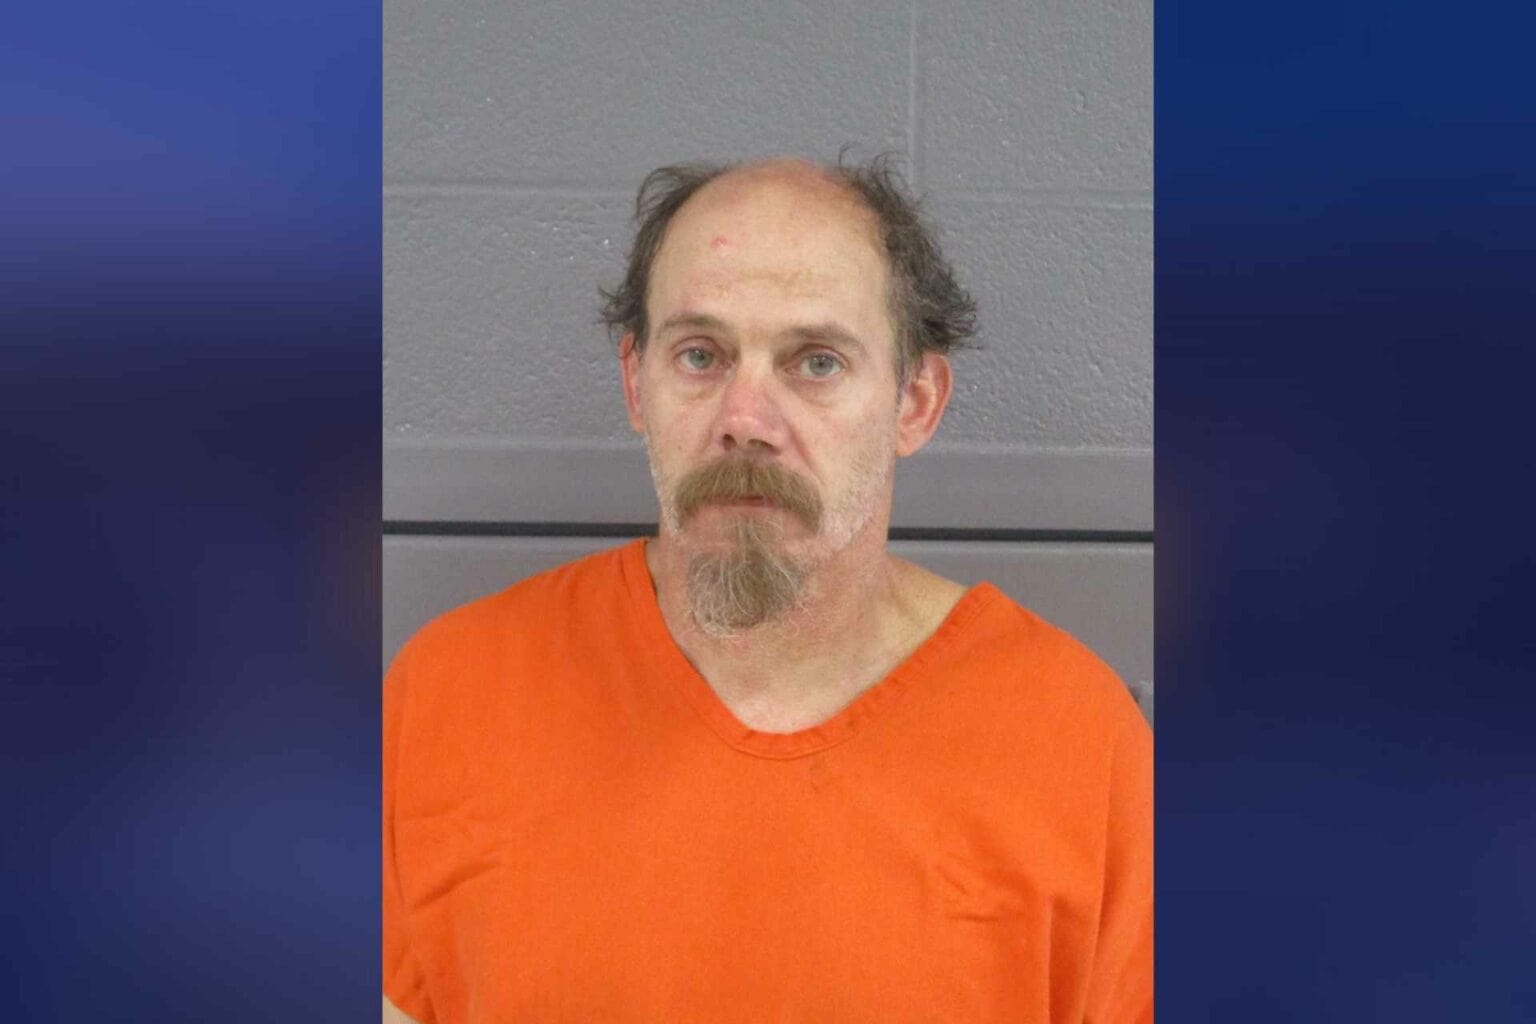 Upshur County man arrested on drugrelated charges on Easter Sunday